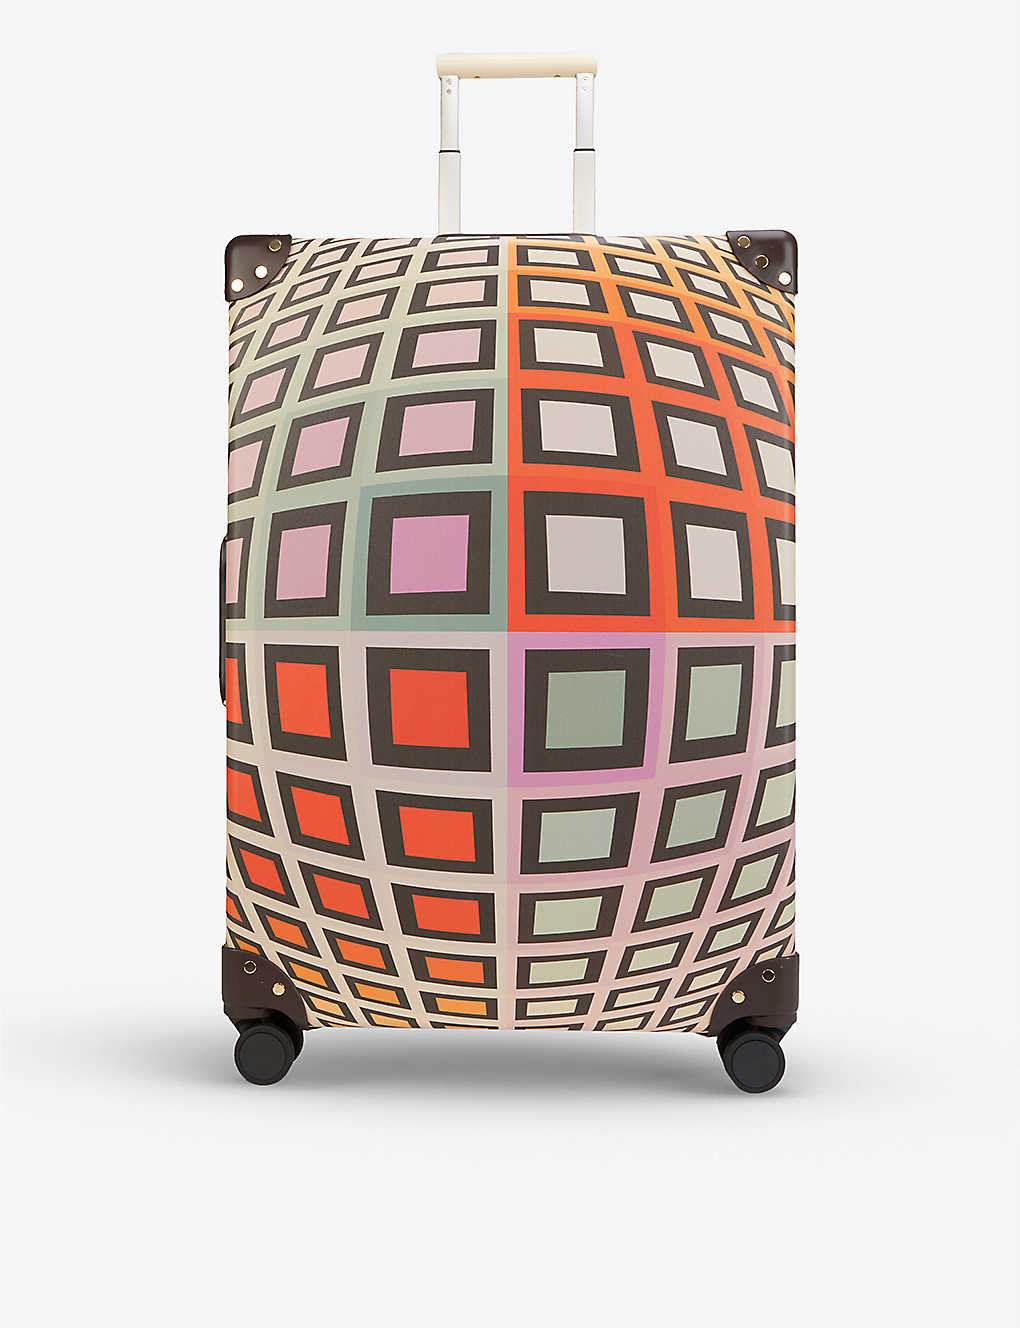 selfridges.com | GLOBE-TROTTER Globe-Trotter x Vasarely four-wheel check-in suitcase